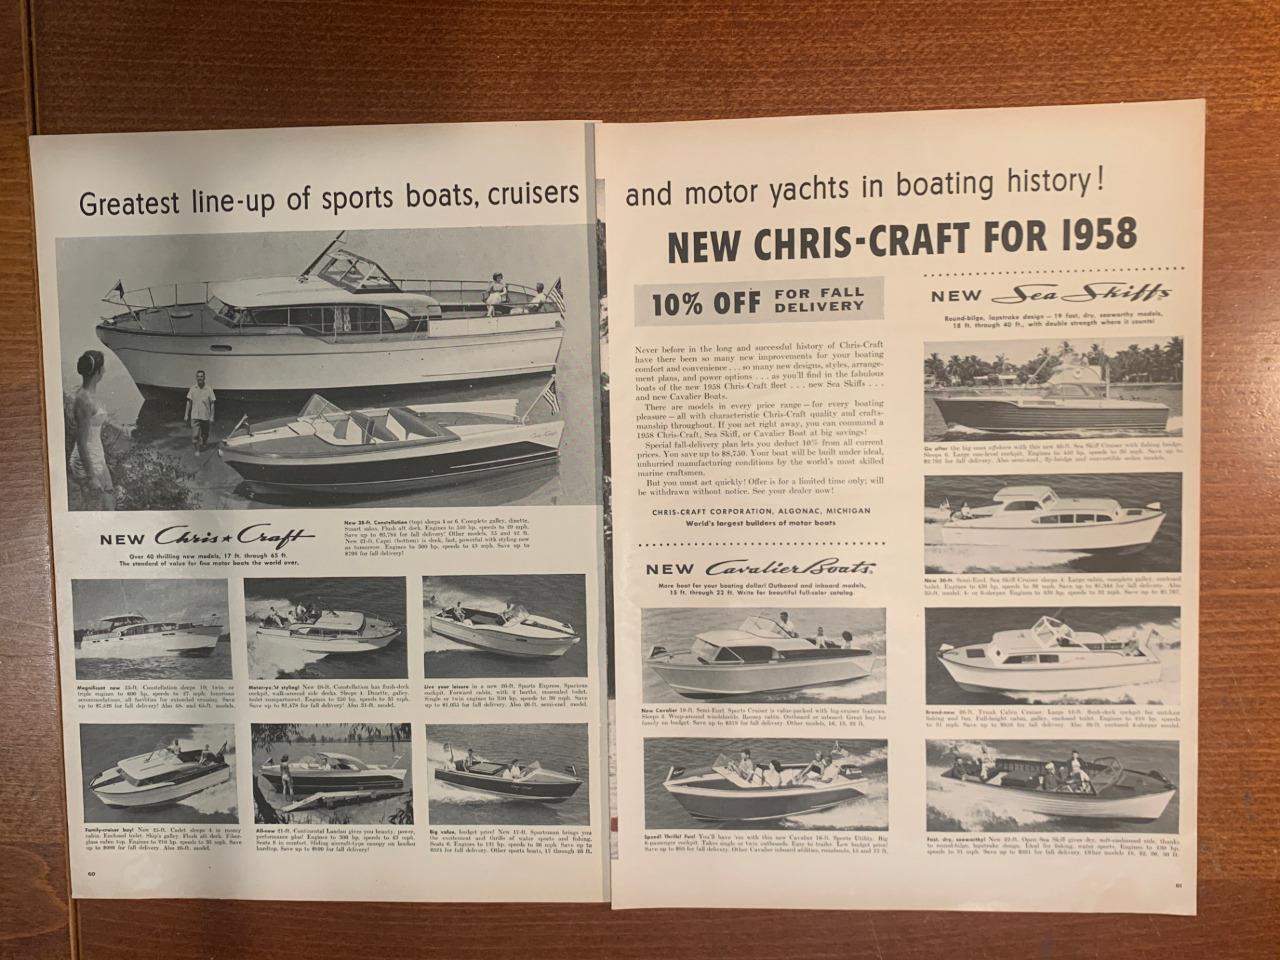 Magazine Ad* - 1958 - Chris-Craft Boats - 14 models shown - (two-pages)